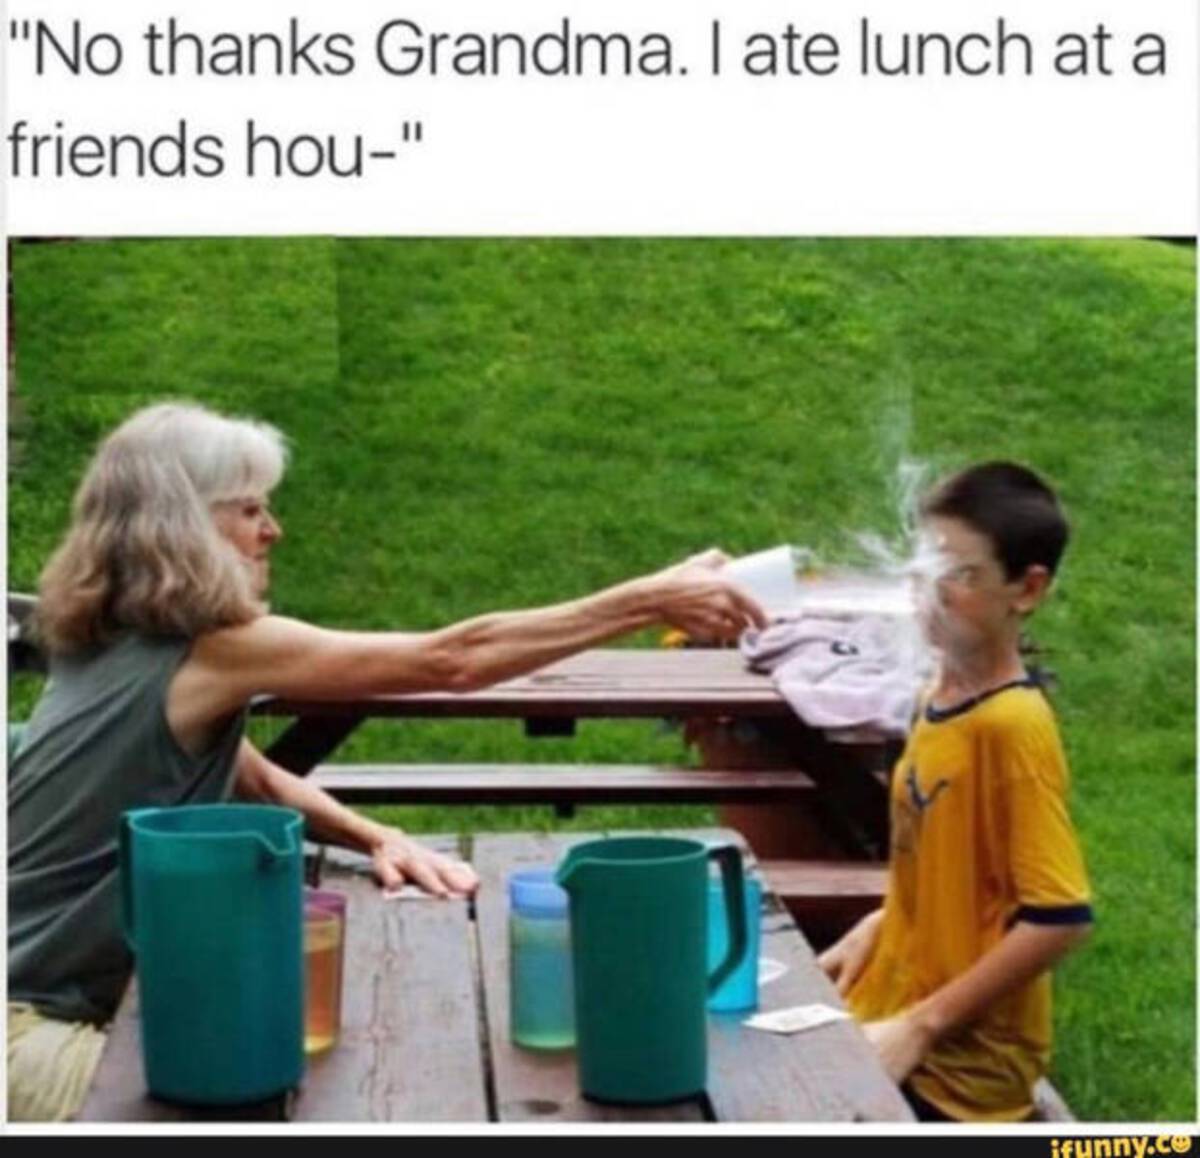 did you know there's only 2 - "No thanks Grandma. I ate lunch at a friends hou" ifunny.co